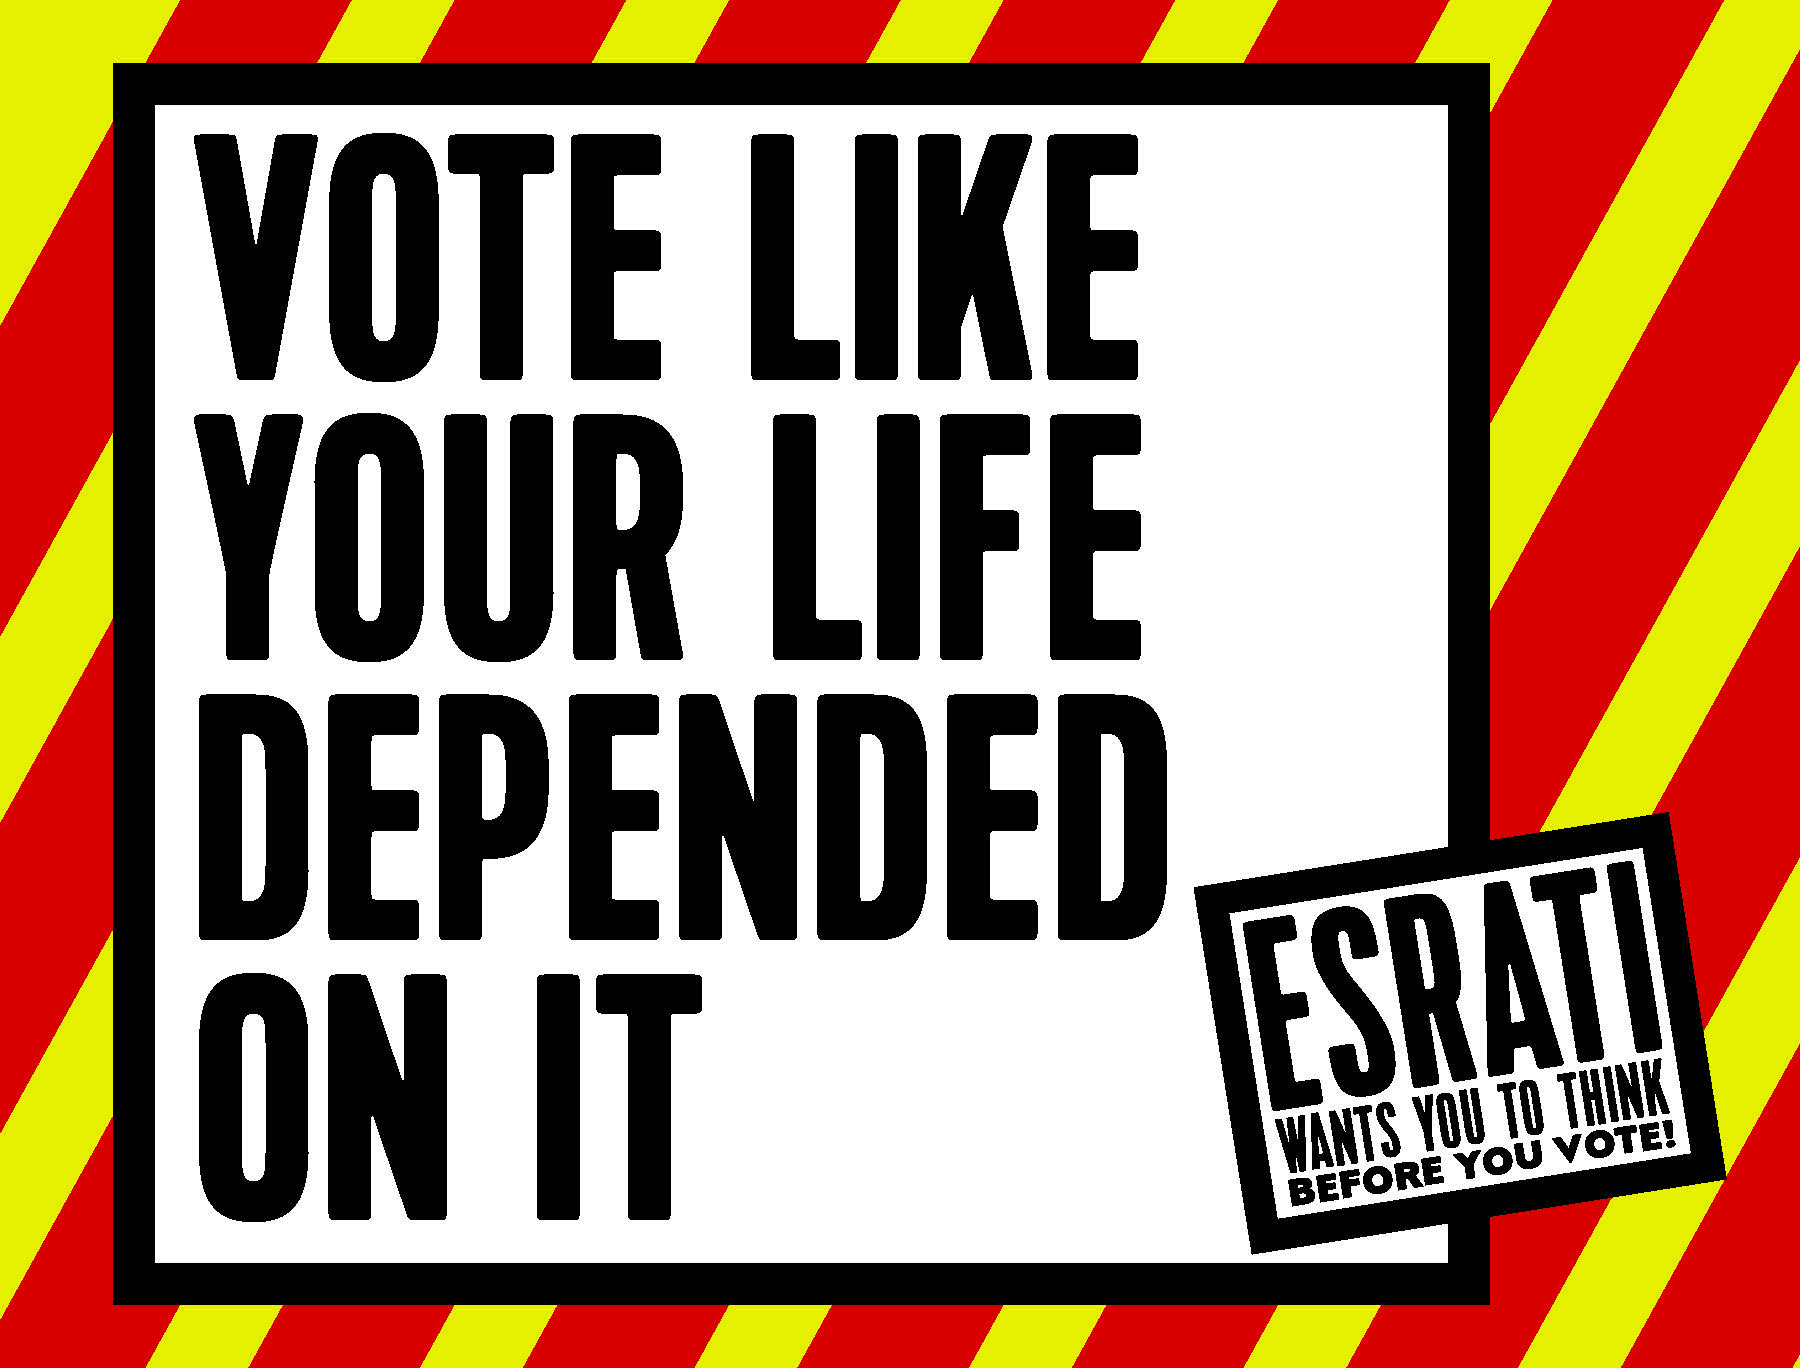 Vote like your life depended on it